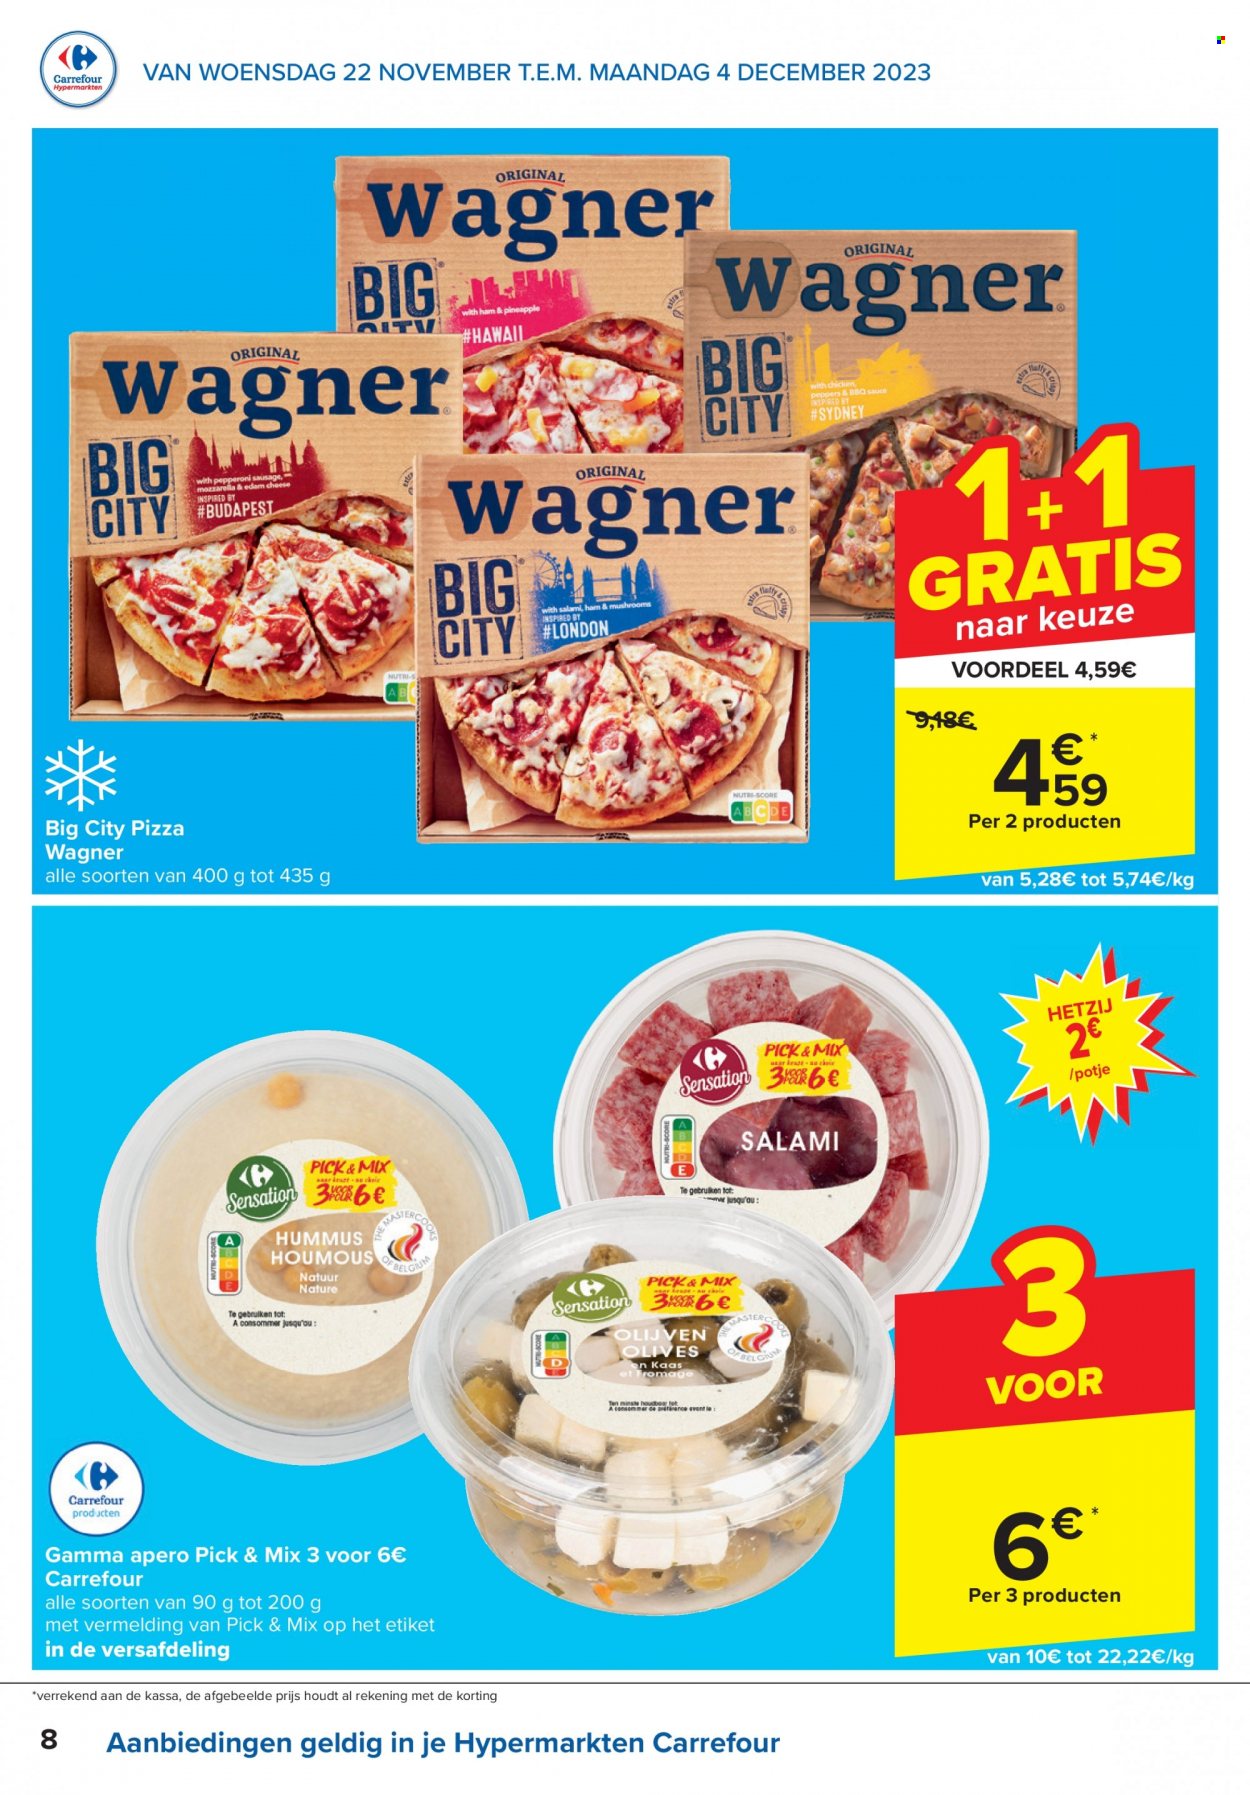 Catalogue Carrefour hypermarkt - 22.11.2023 - 4.12.2023. Page 8.